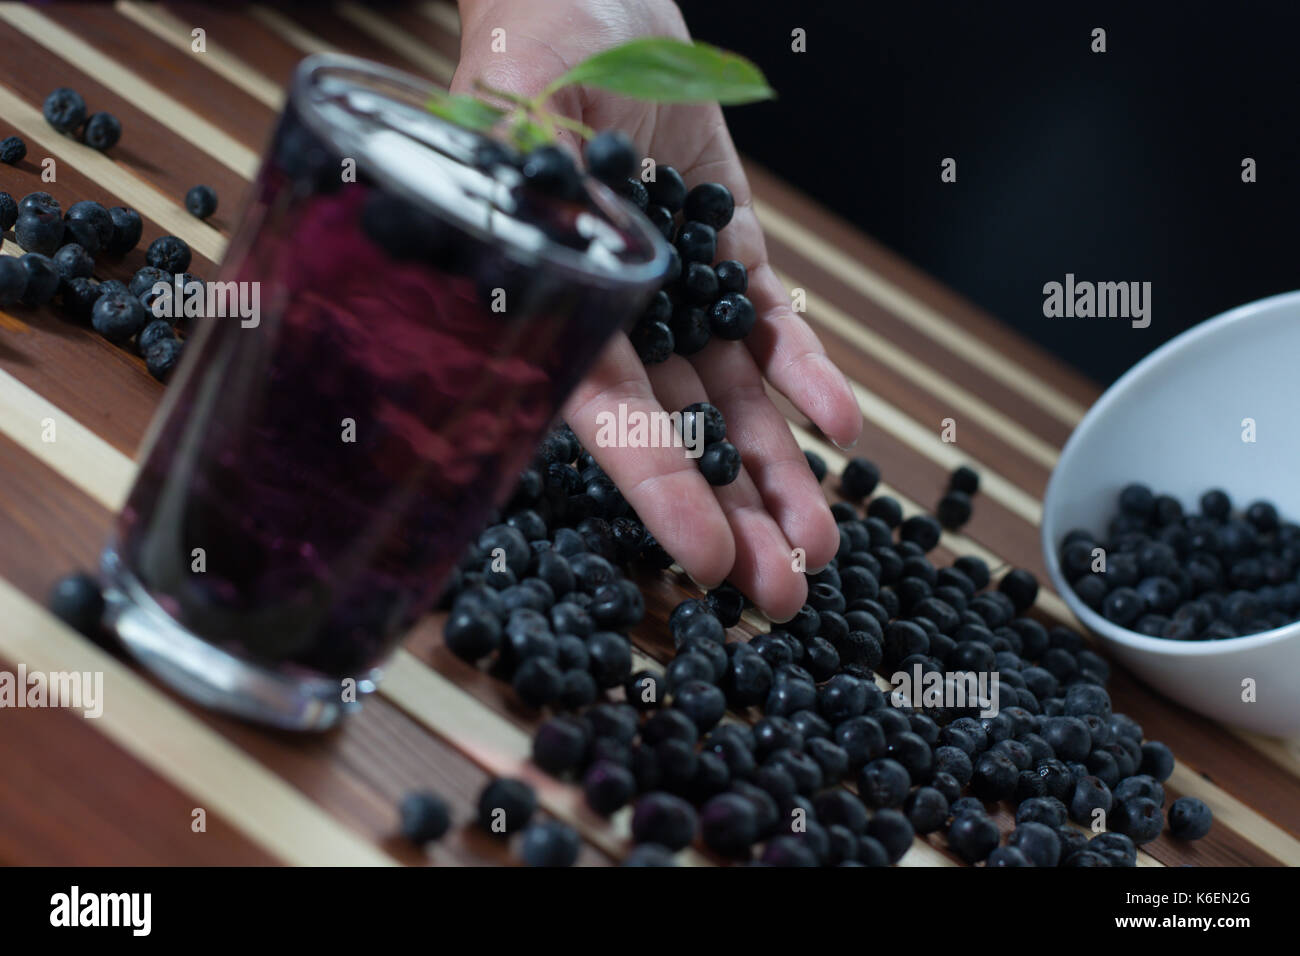 Female hand with aronia and bowl full of aronia spilled on wooden table with glass of aronia juice Stock Photo